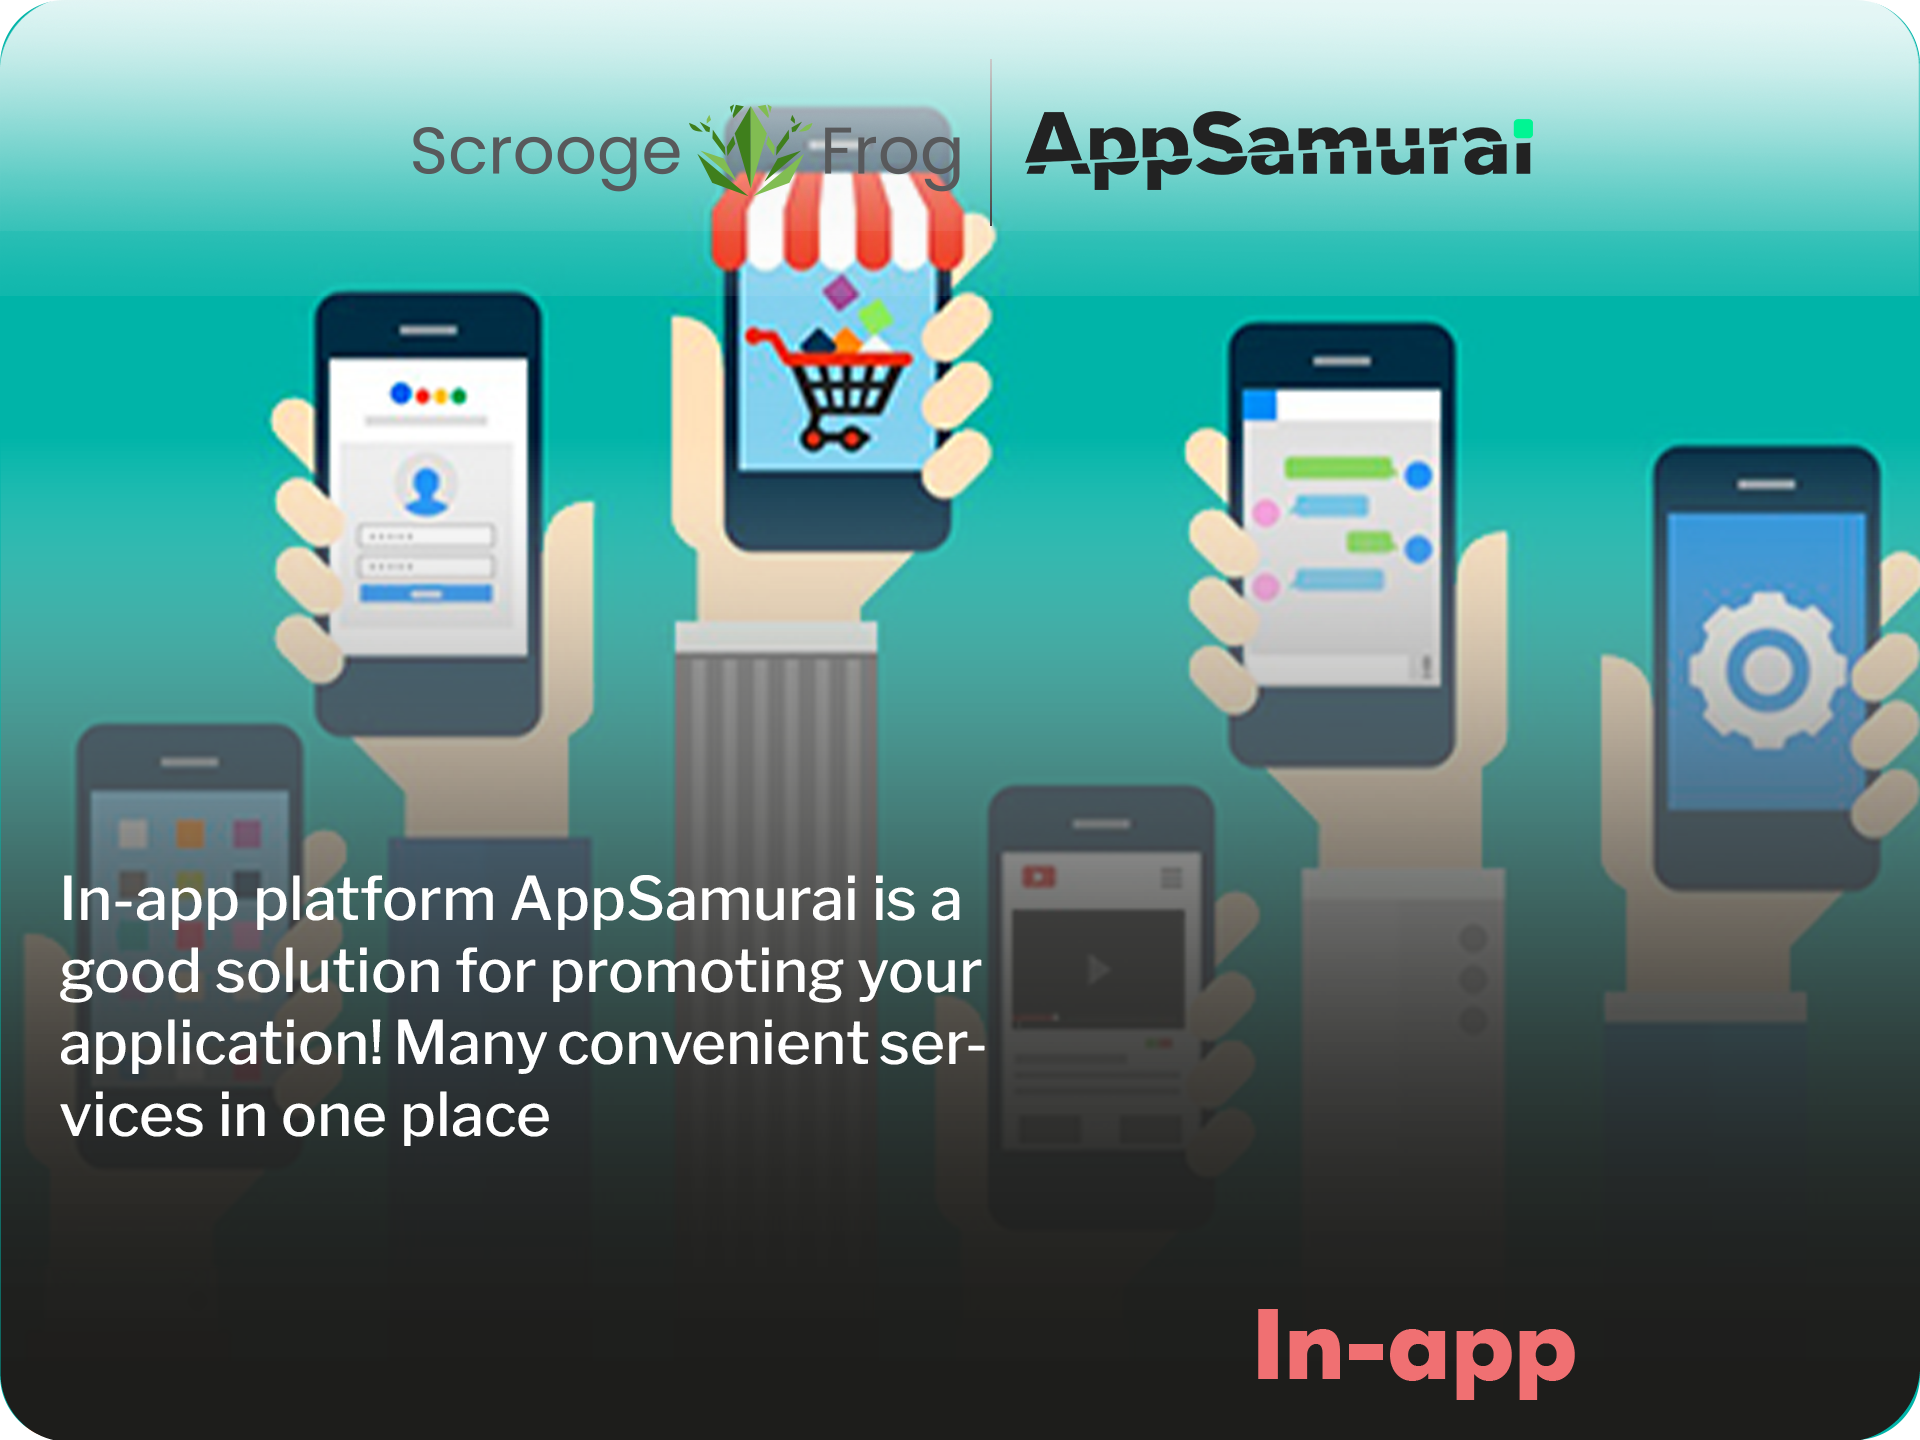 In-app platform AppSamurai is a good solution for promoting your application! Many convenient services in one place